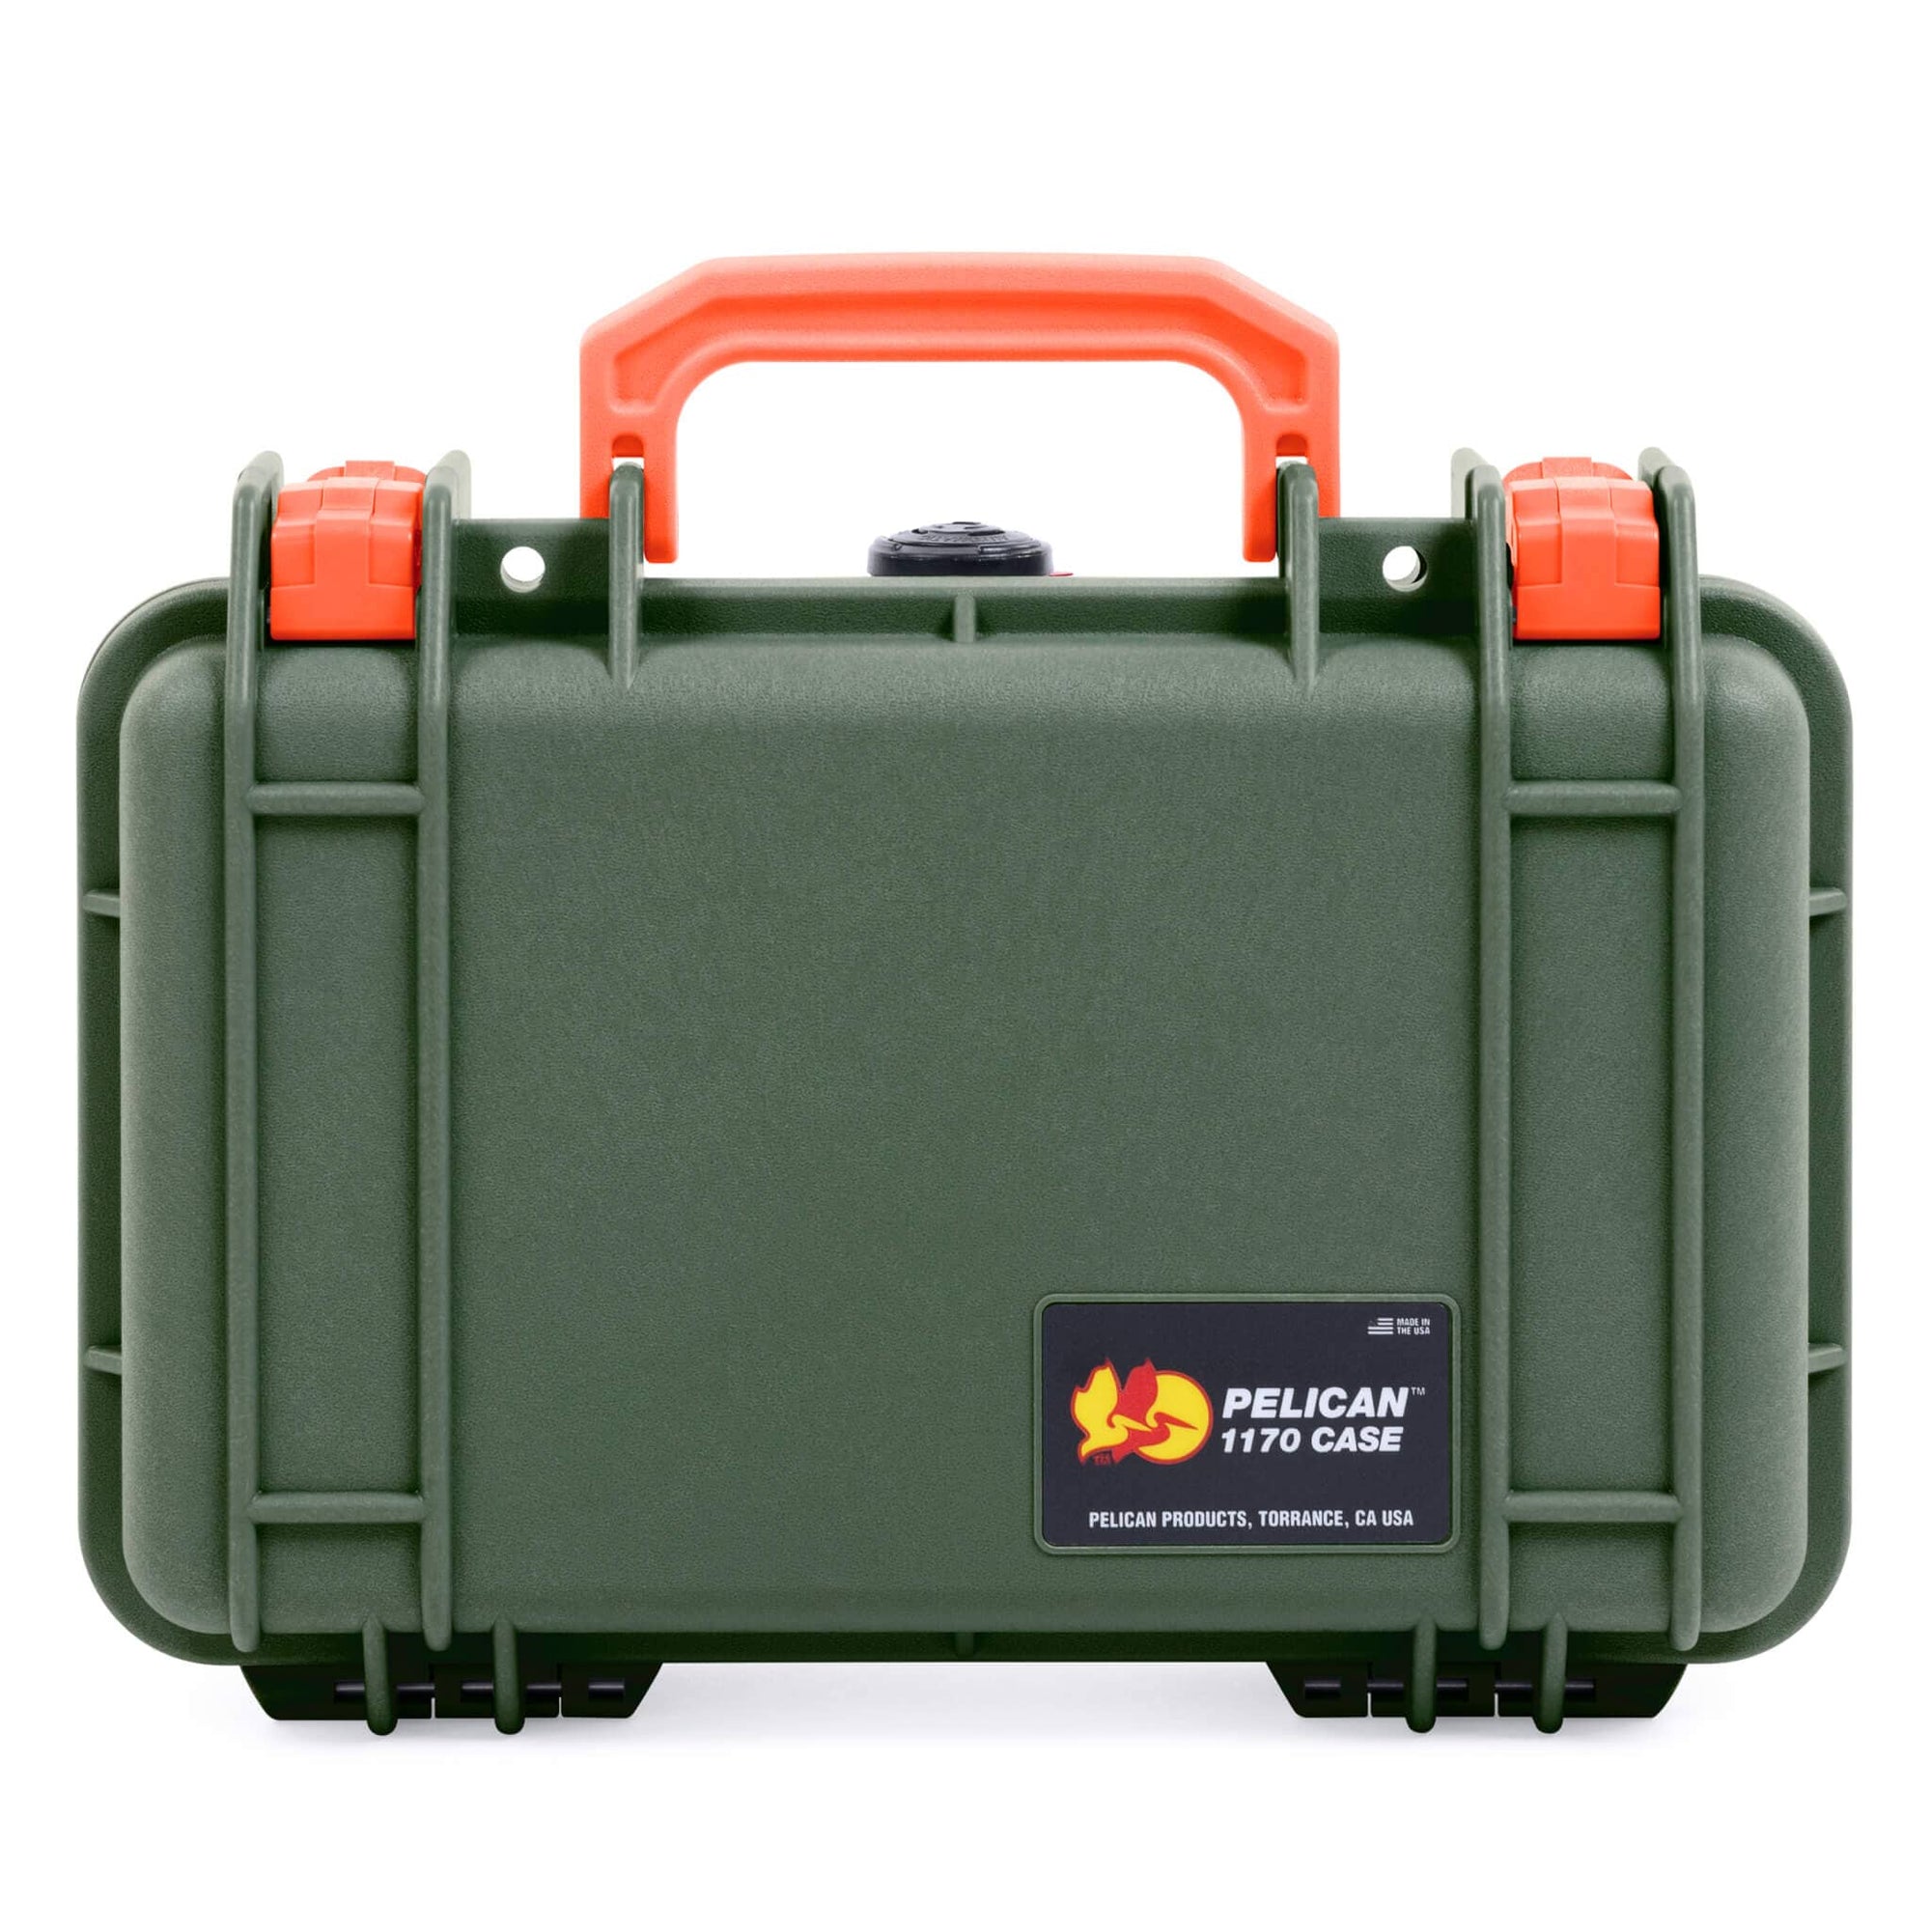 Pelican 1170 Case, OD Green with Orange Handle & Latches ColorCase 